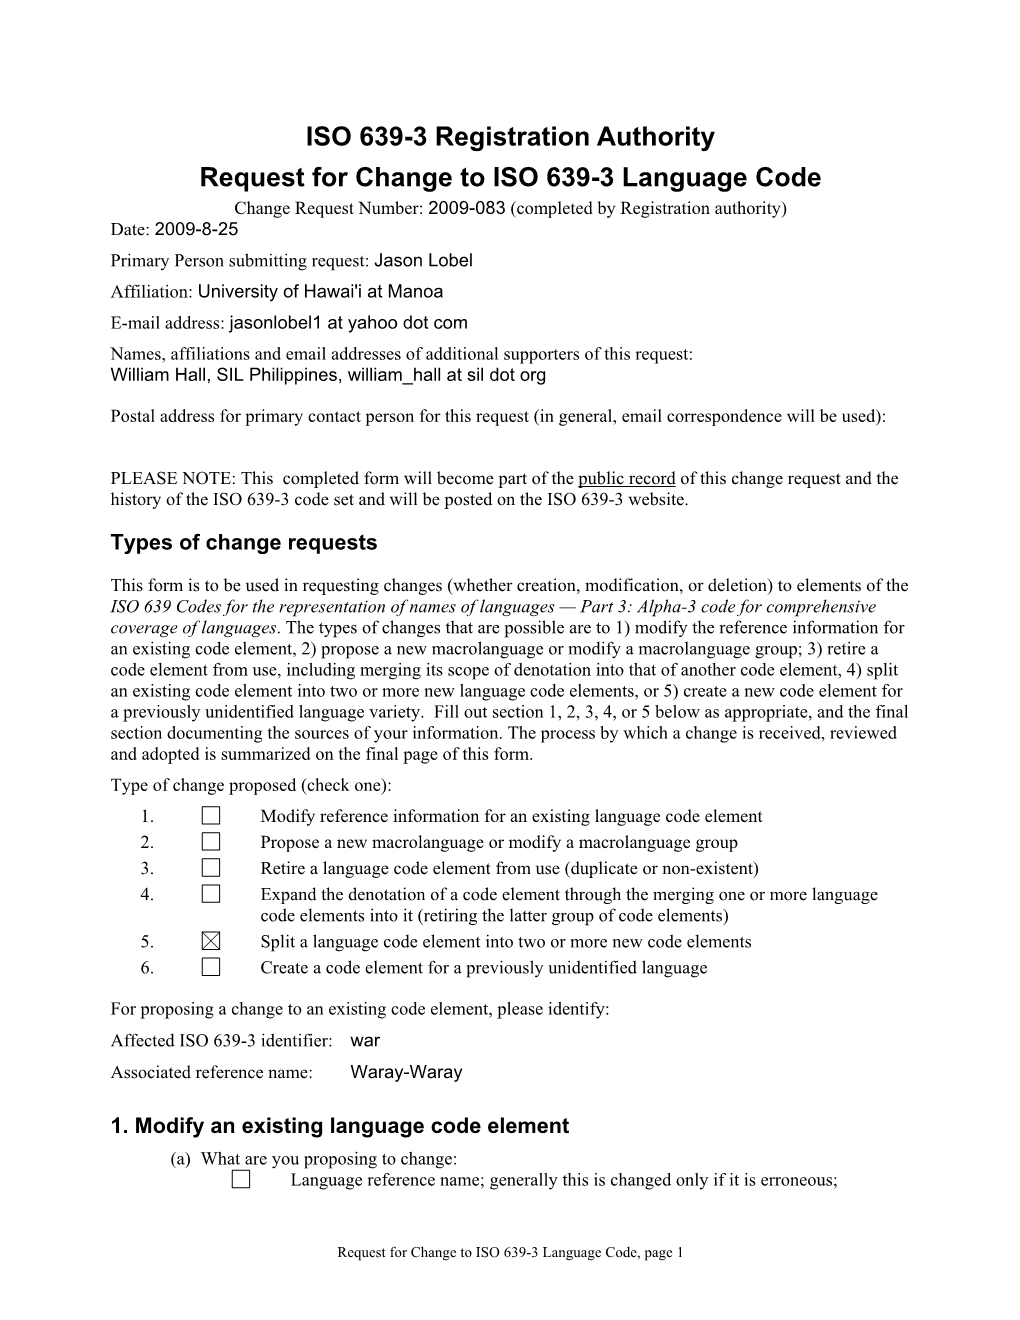 ISO 639-3 Code Change Request 2009-083